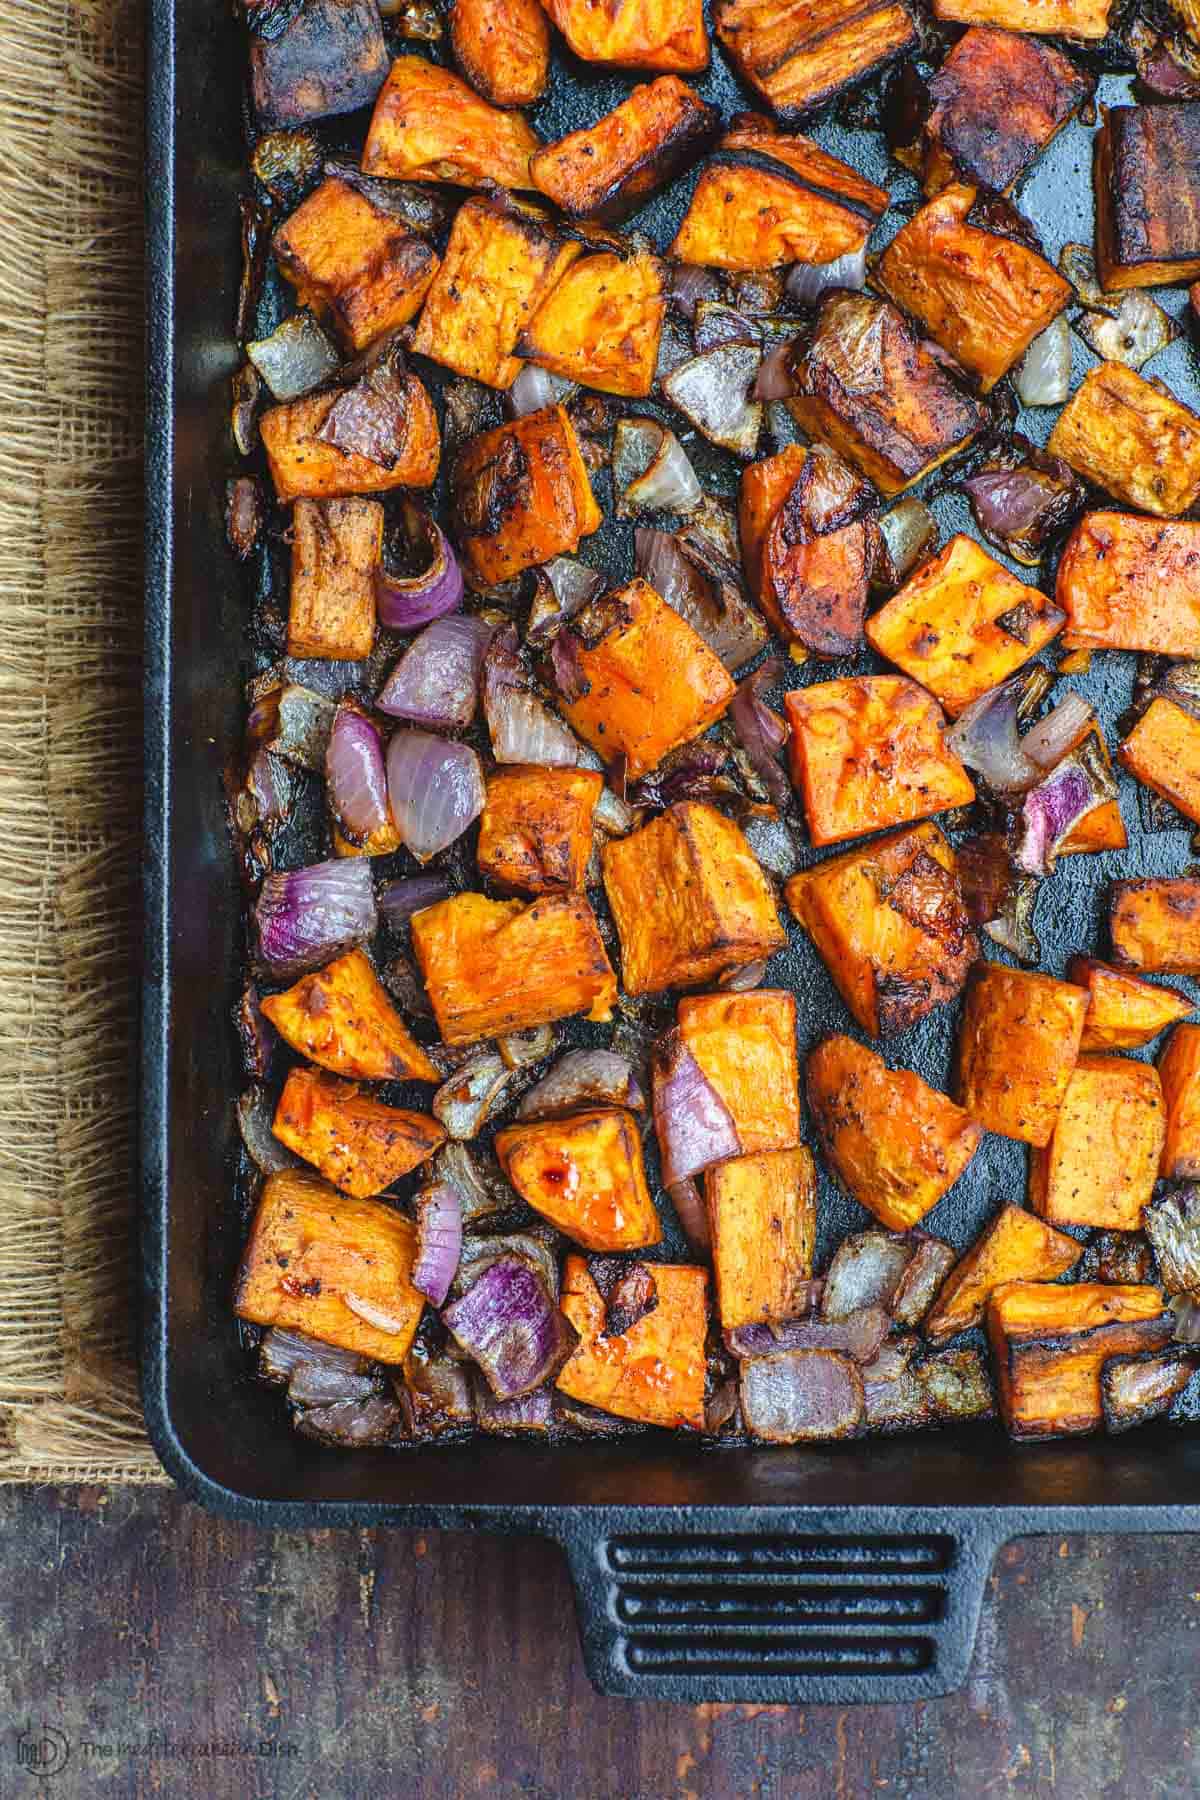 Roasted Sweet Potatoes Recipe Easy Delicous The Mediterranean Dish